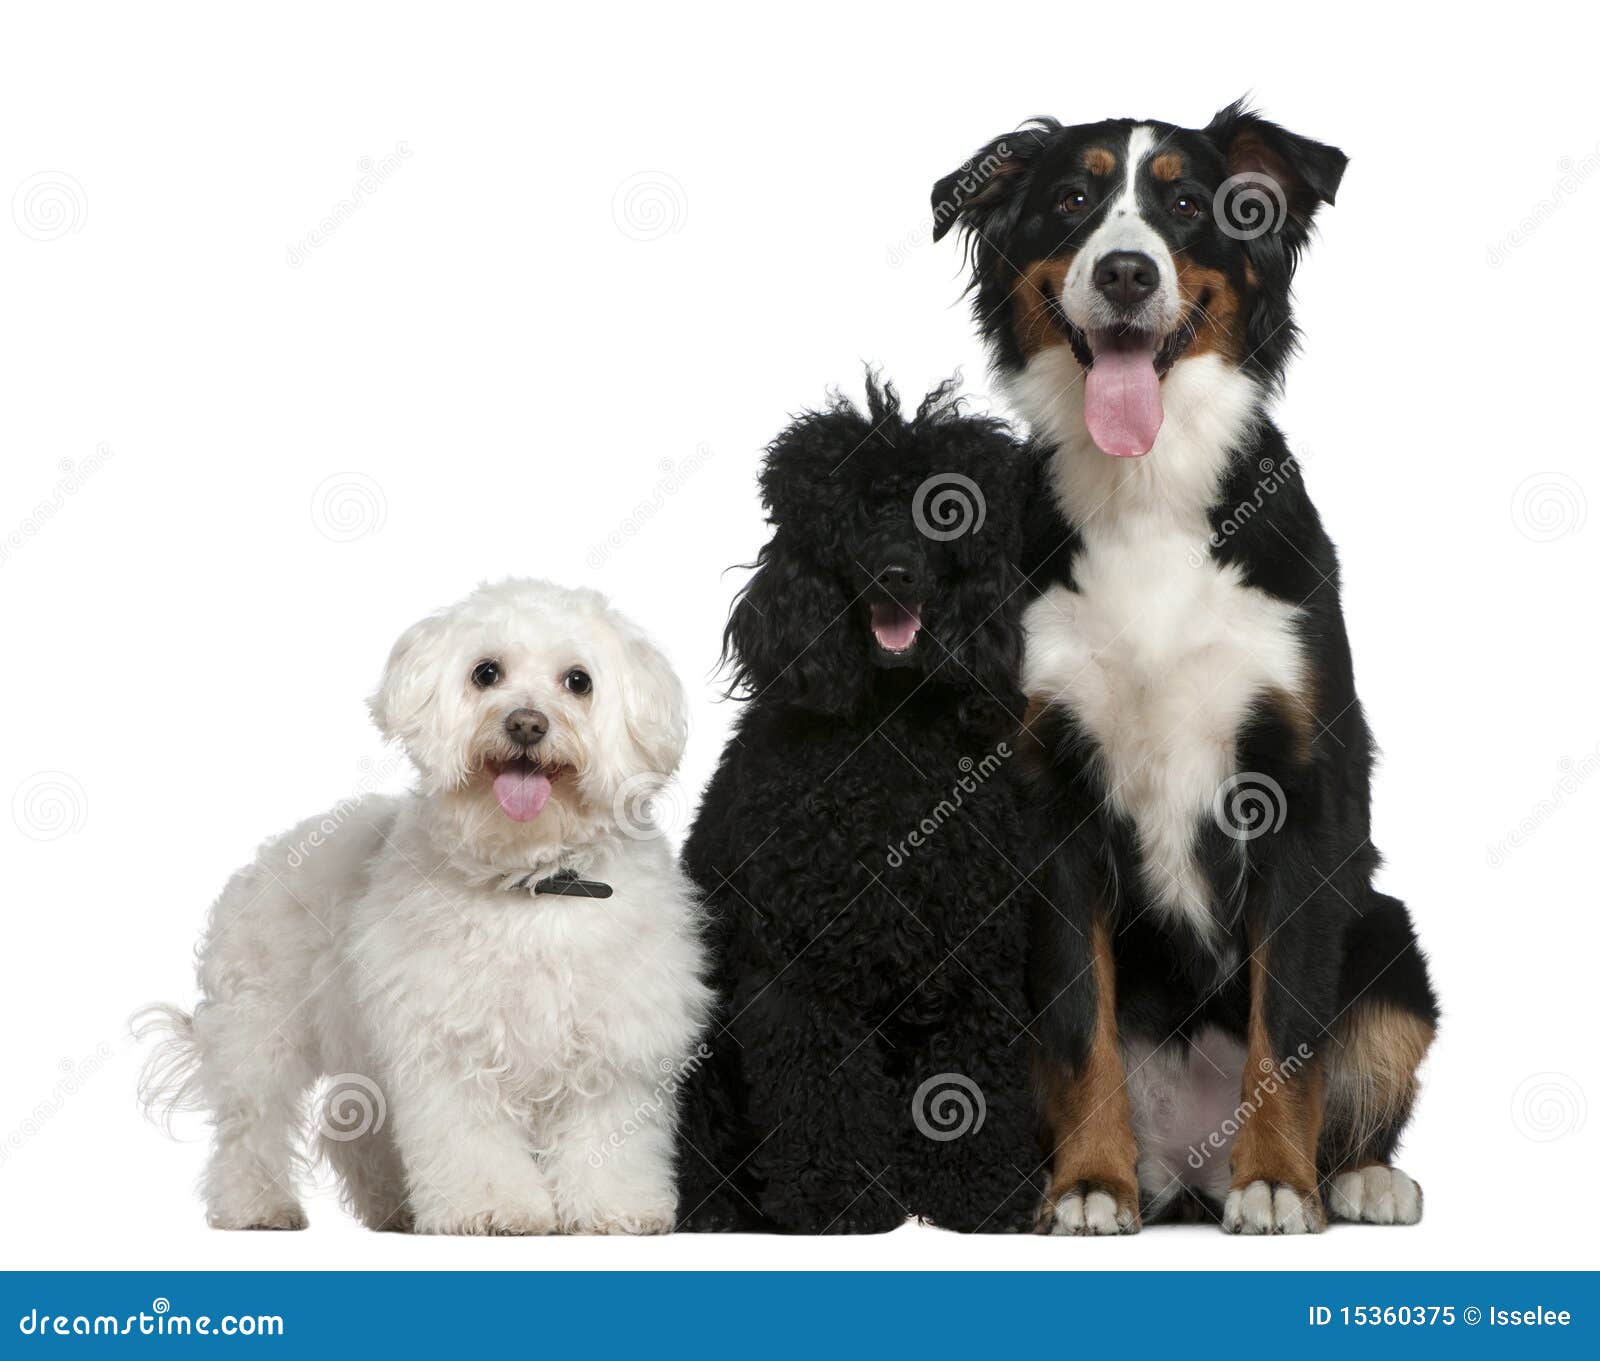 Bichon Frise Poodle And Bernese Mountain Dog Stock Image Image Of Mountain Looking 15360375